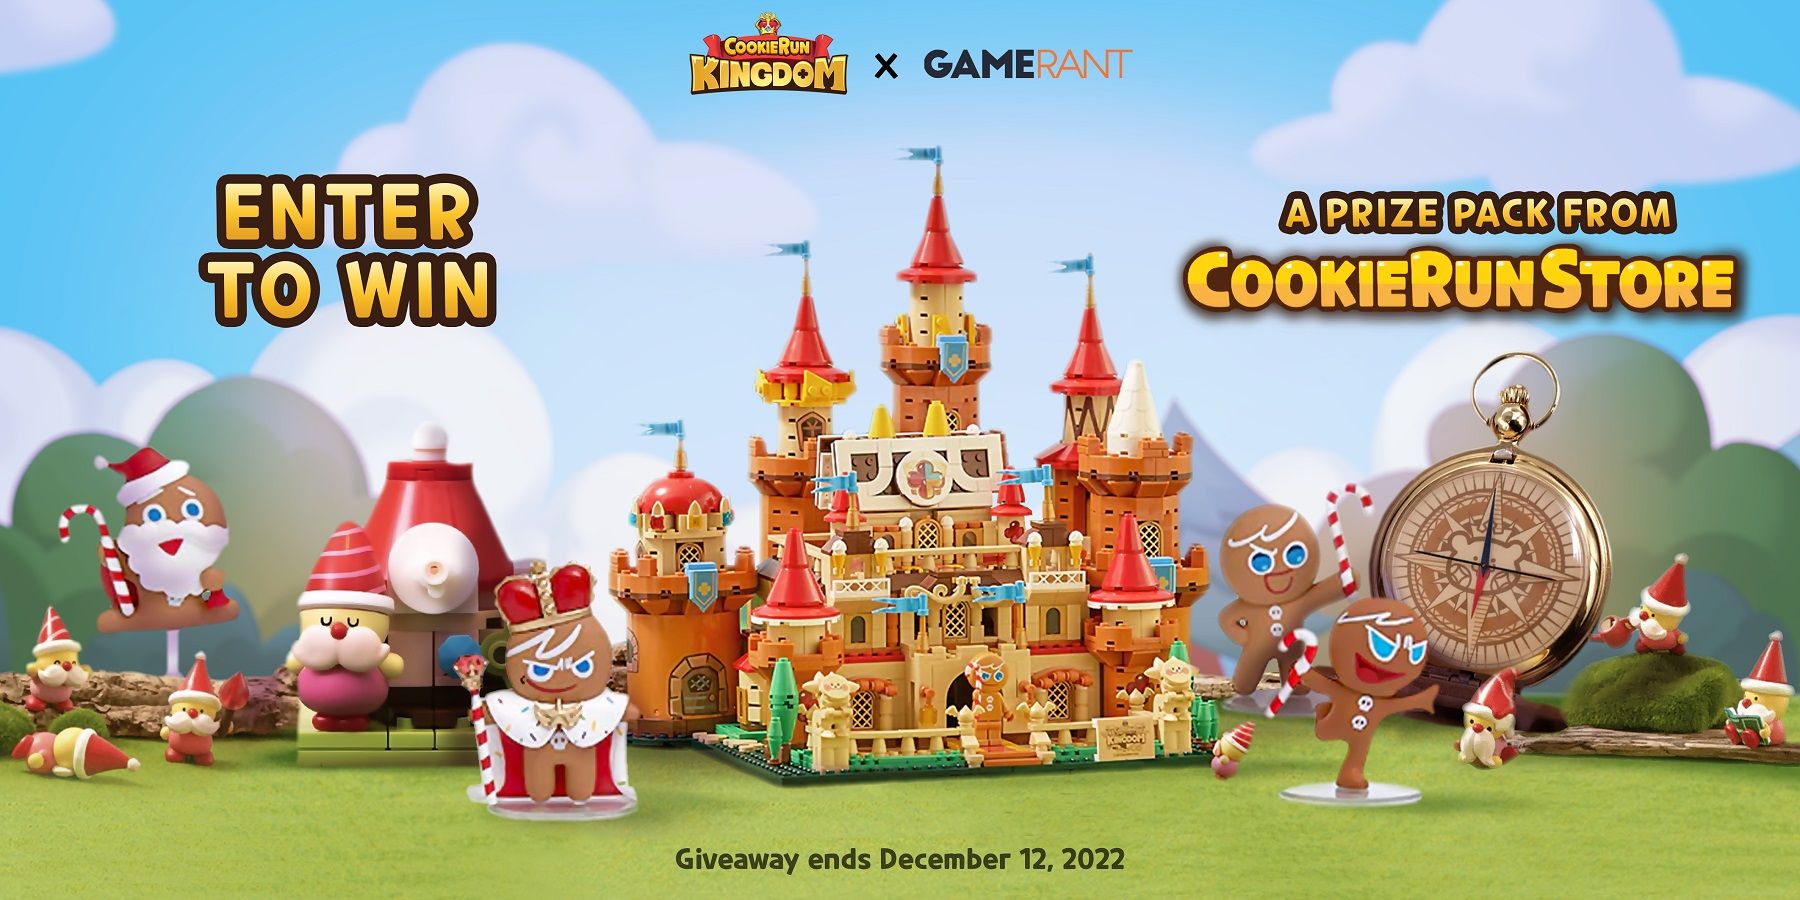 game rant and cookie run kingdom giveaway